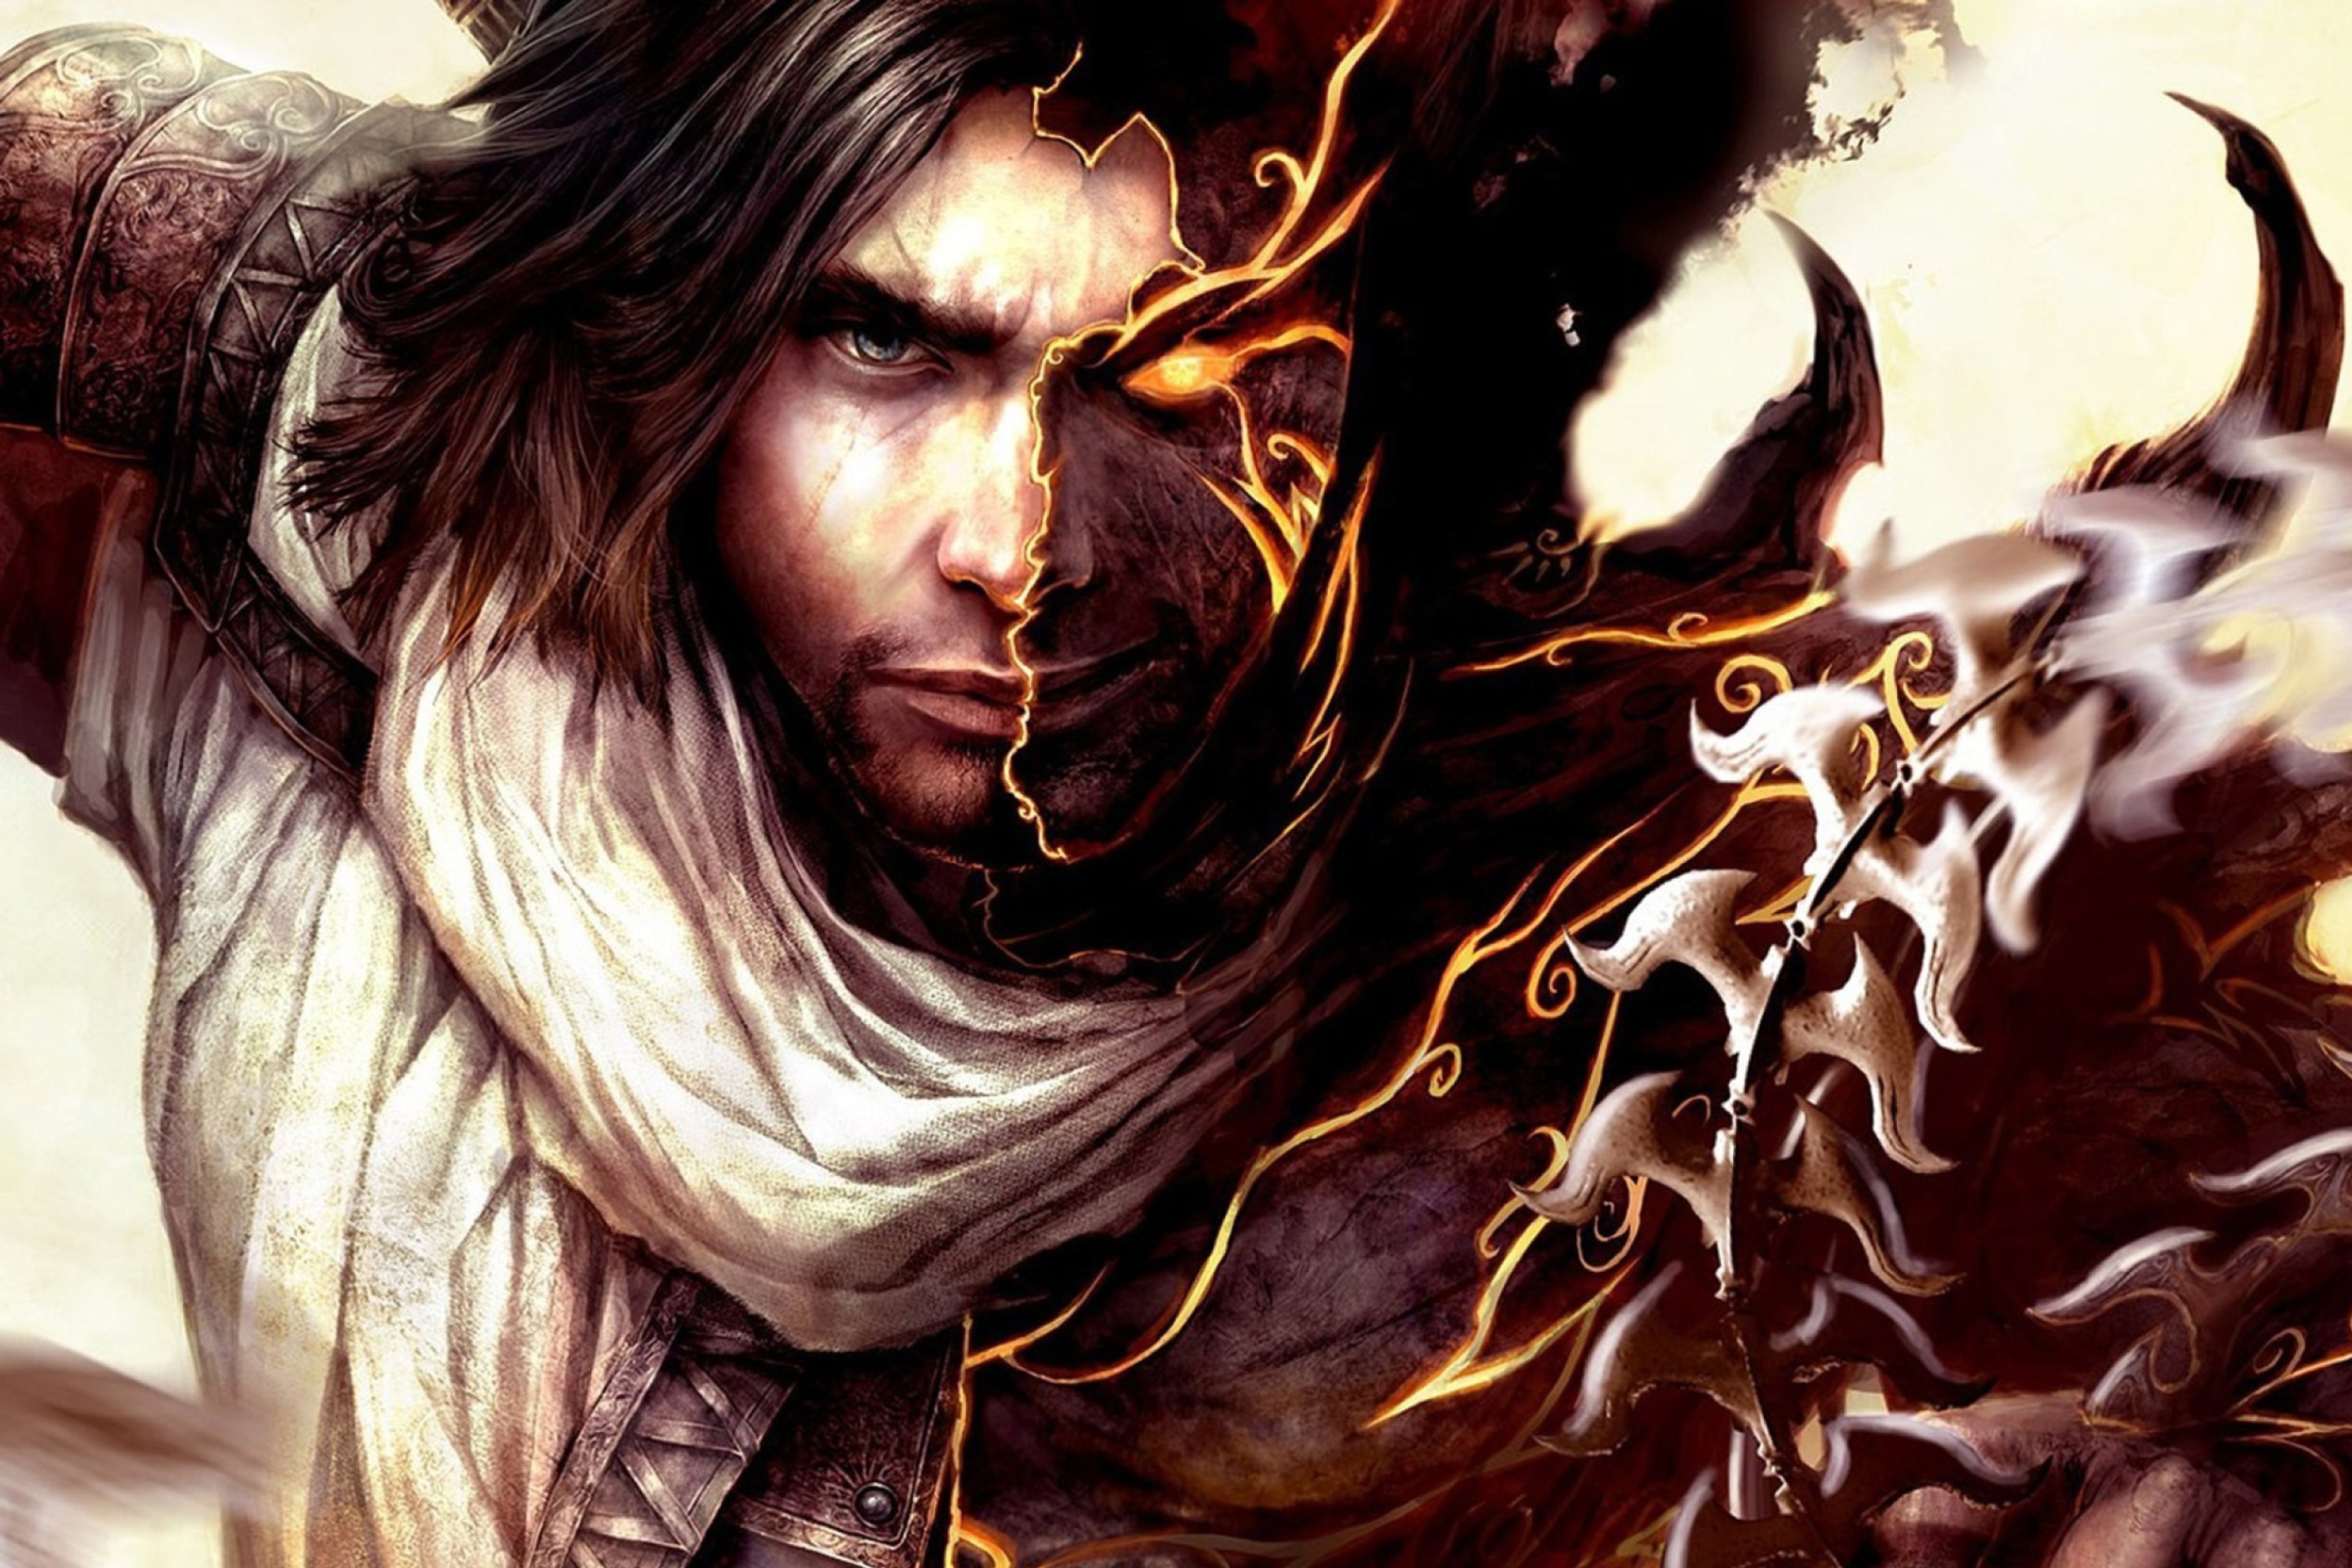 Das Prince Of Persia - The Two Thrones Wallpaper 2880x1920